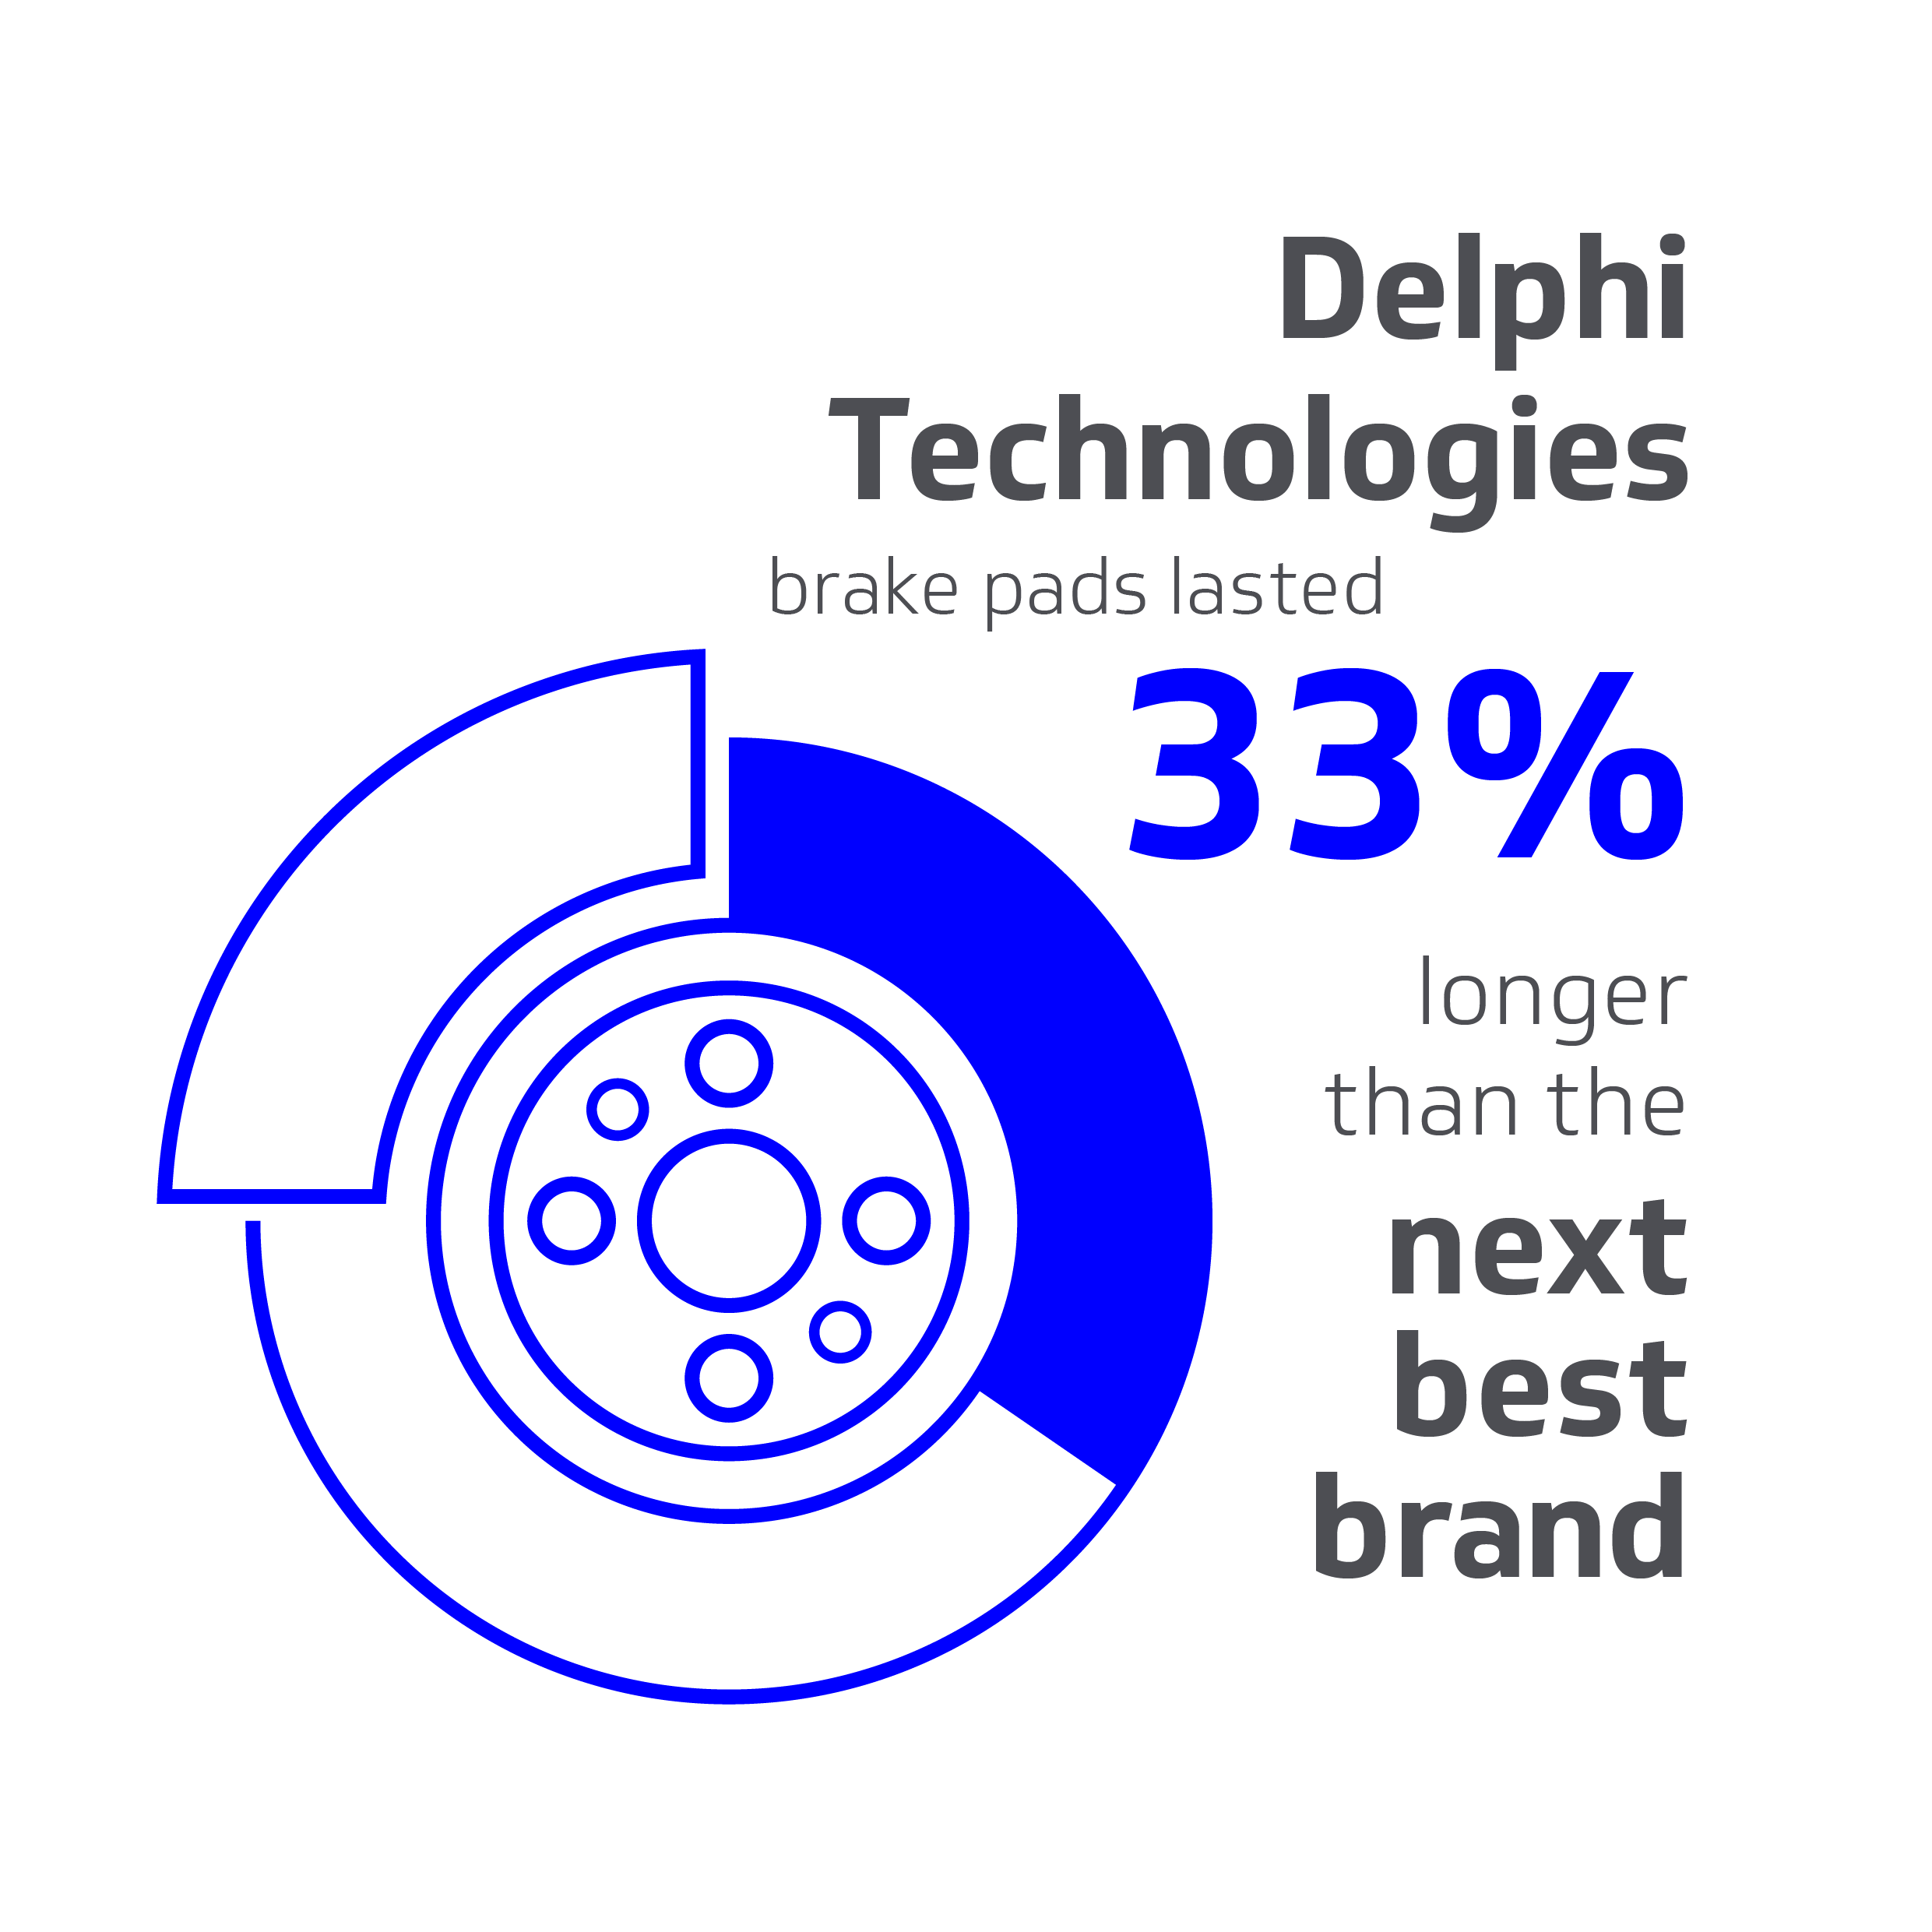 Delphi Technologies Logo - Delphi Technologies Outperforms The Competition In Copper Free Brake